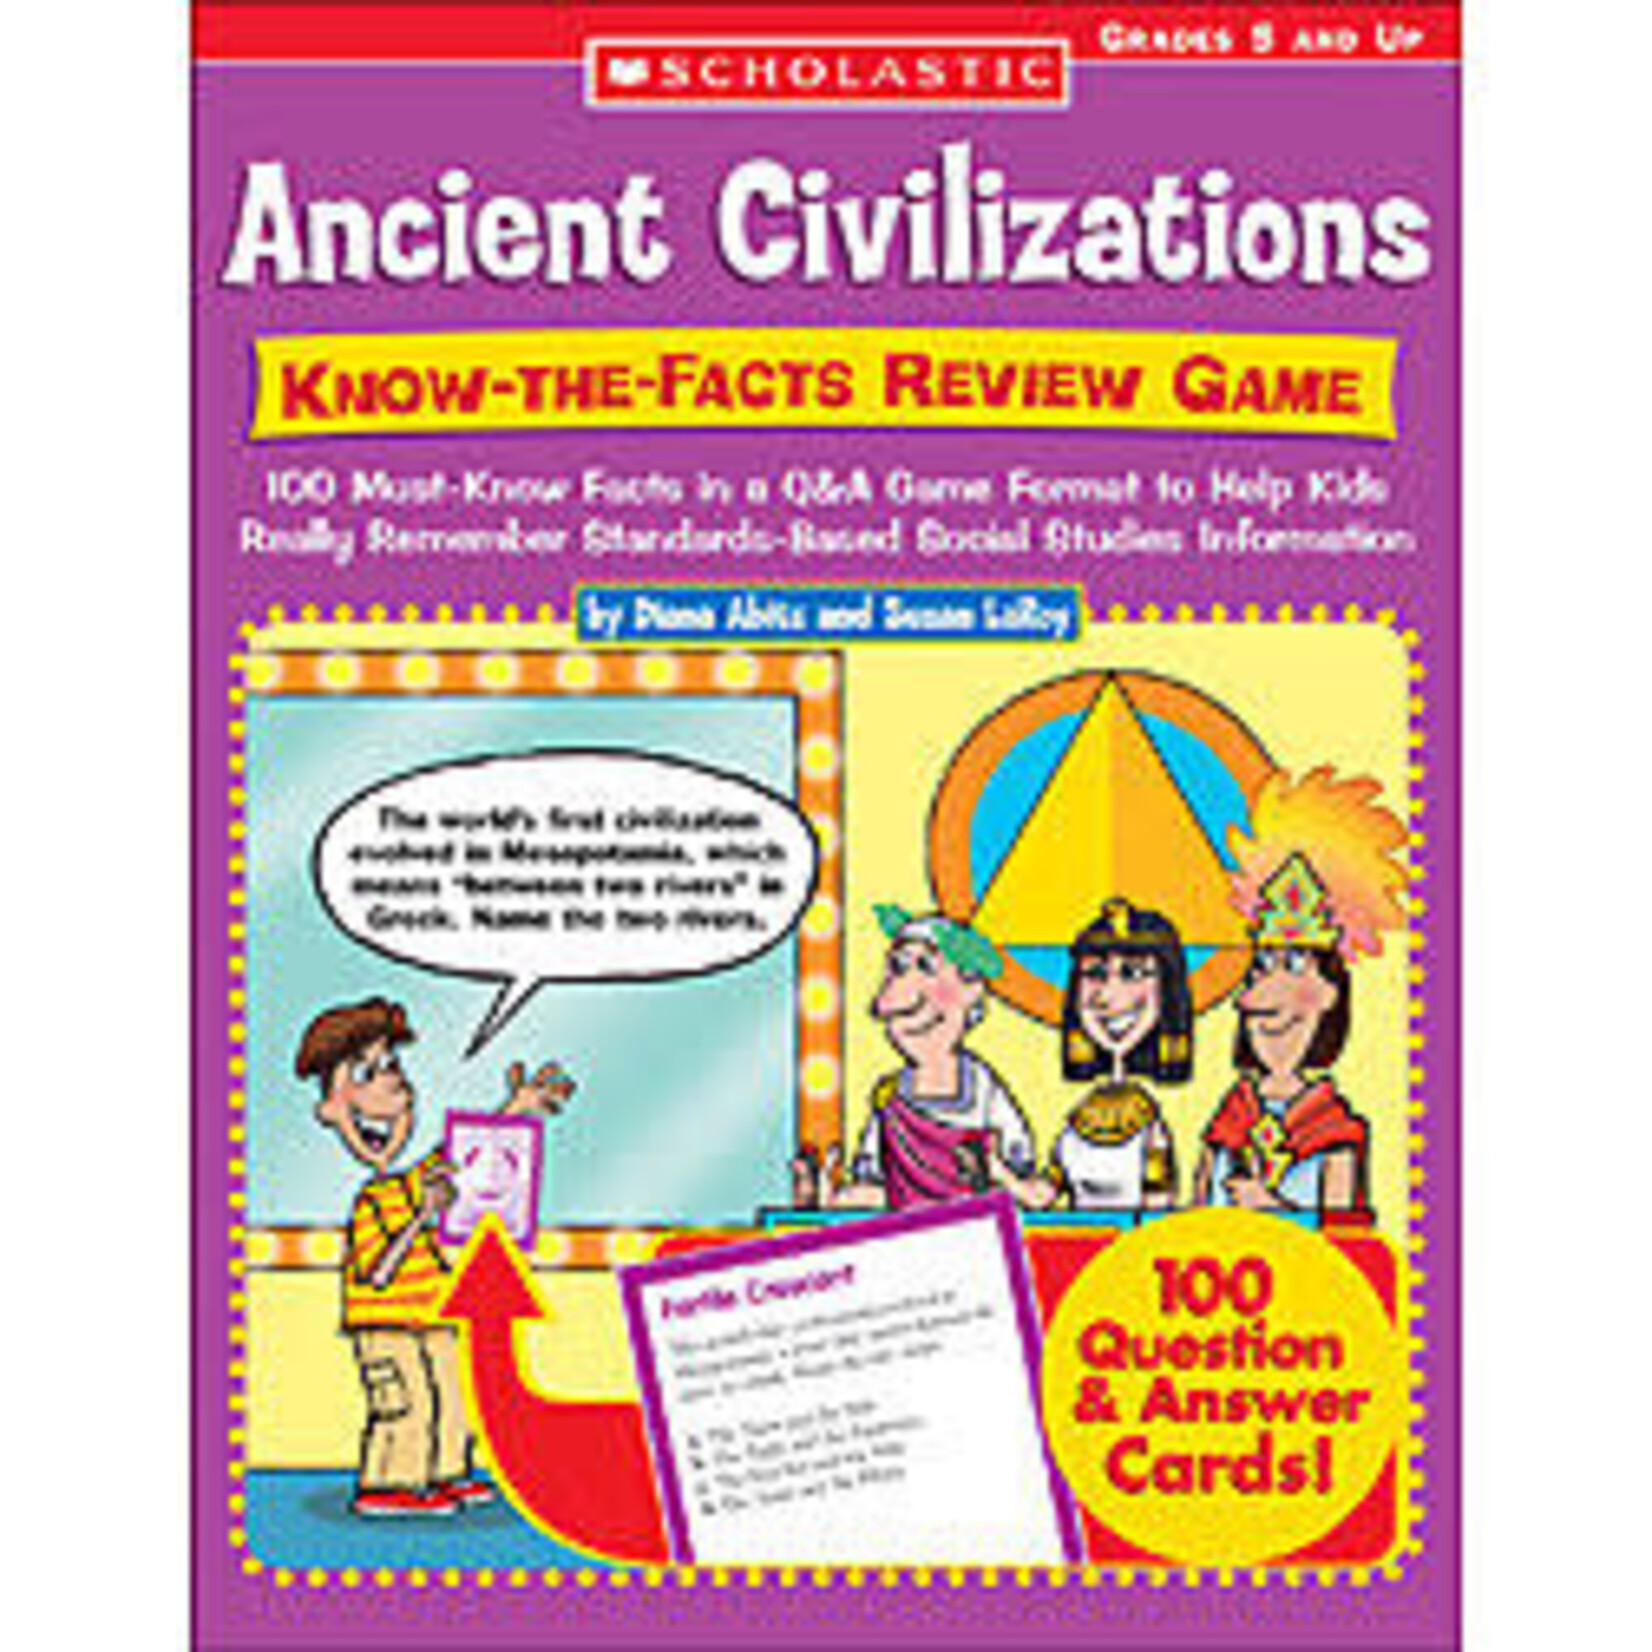 SCHOLASTIC TEACHING RESOURCES Ancient Civilizations: Know-the-Facts Review Game